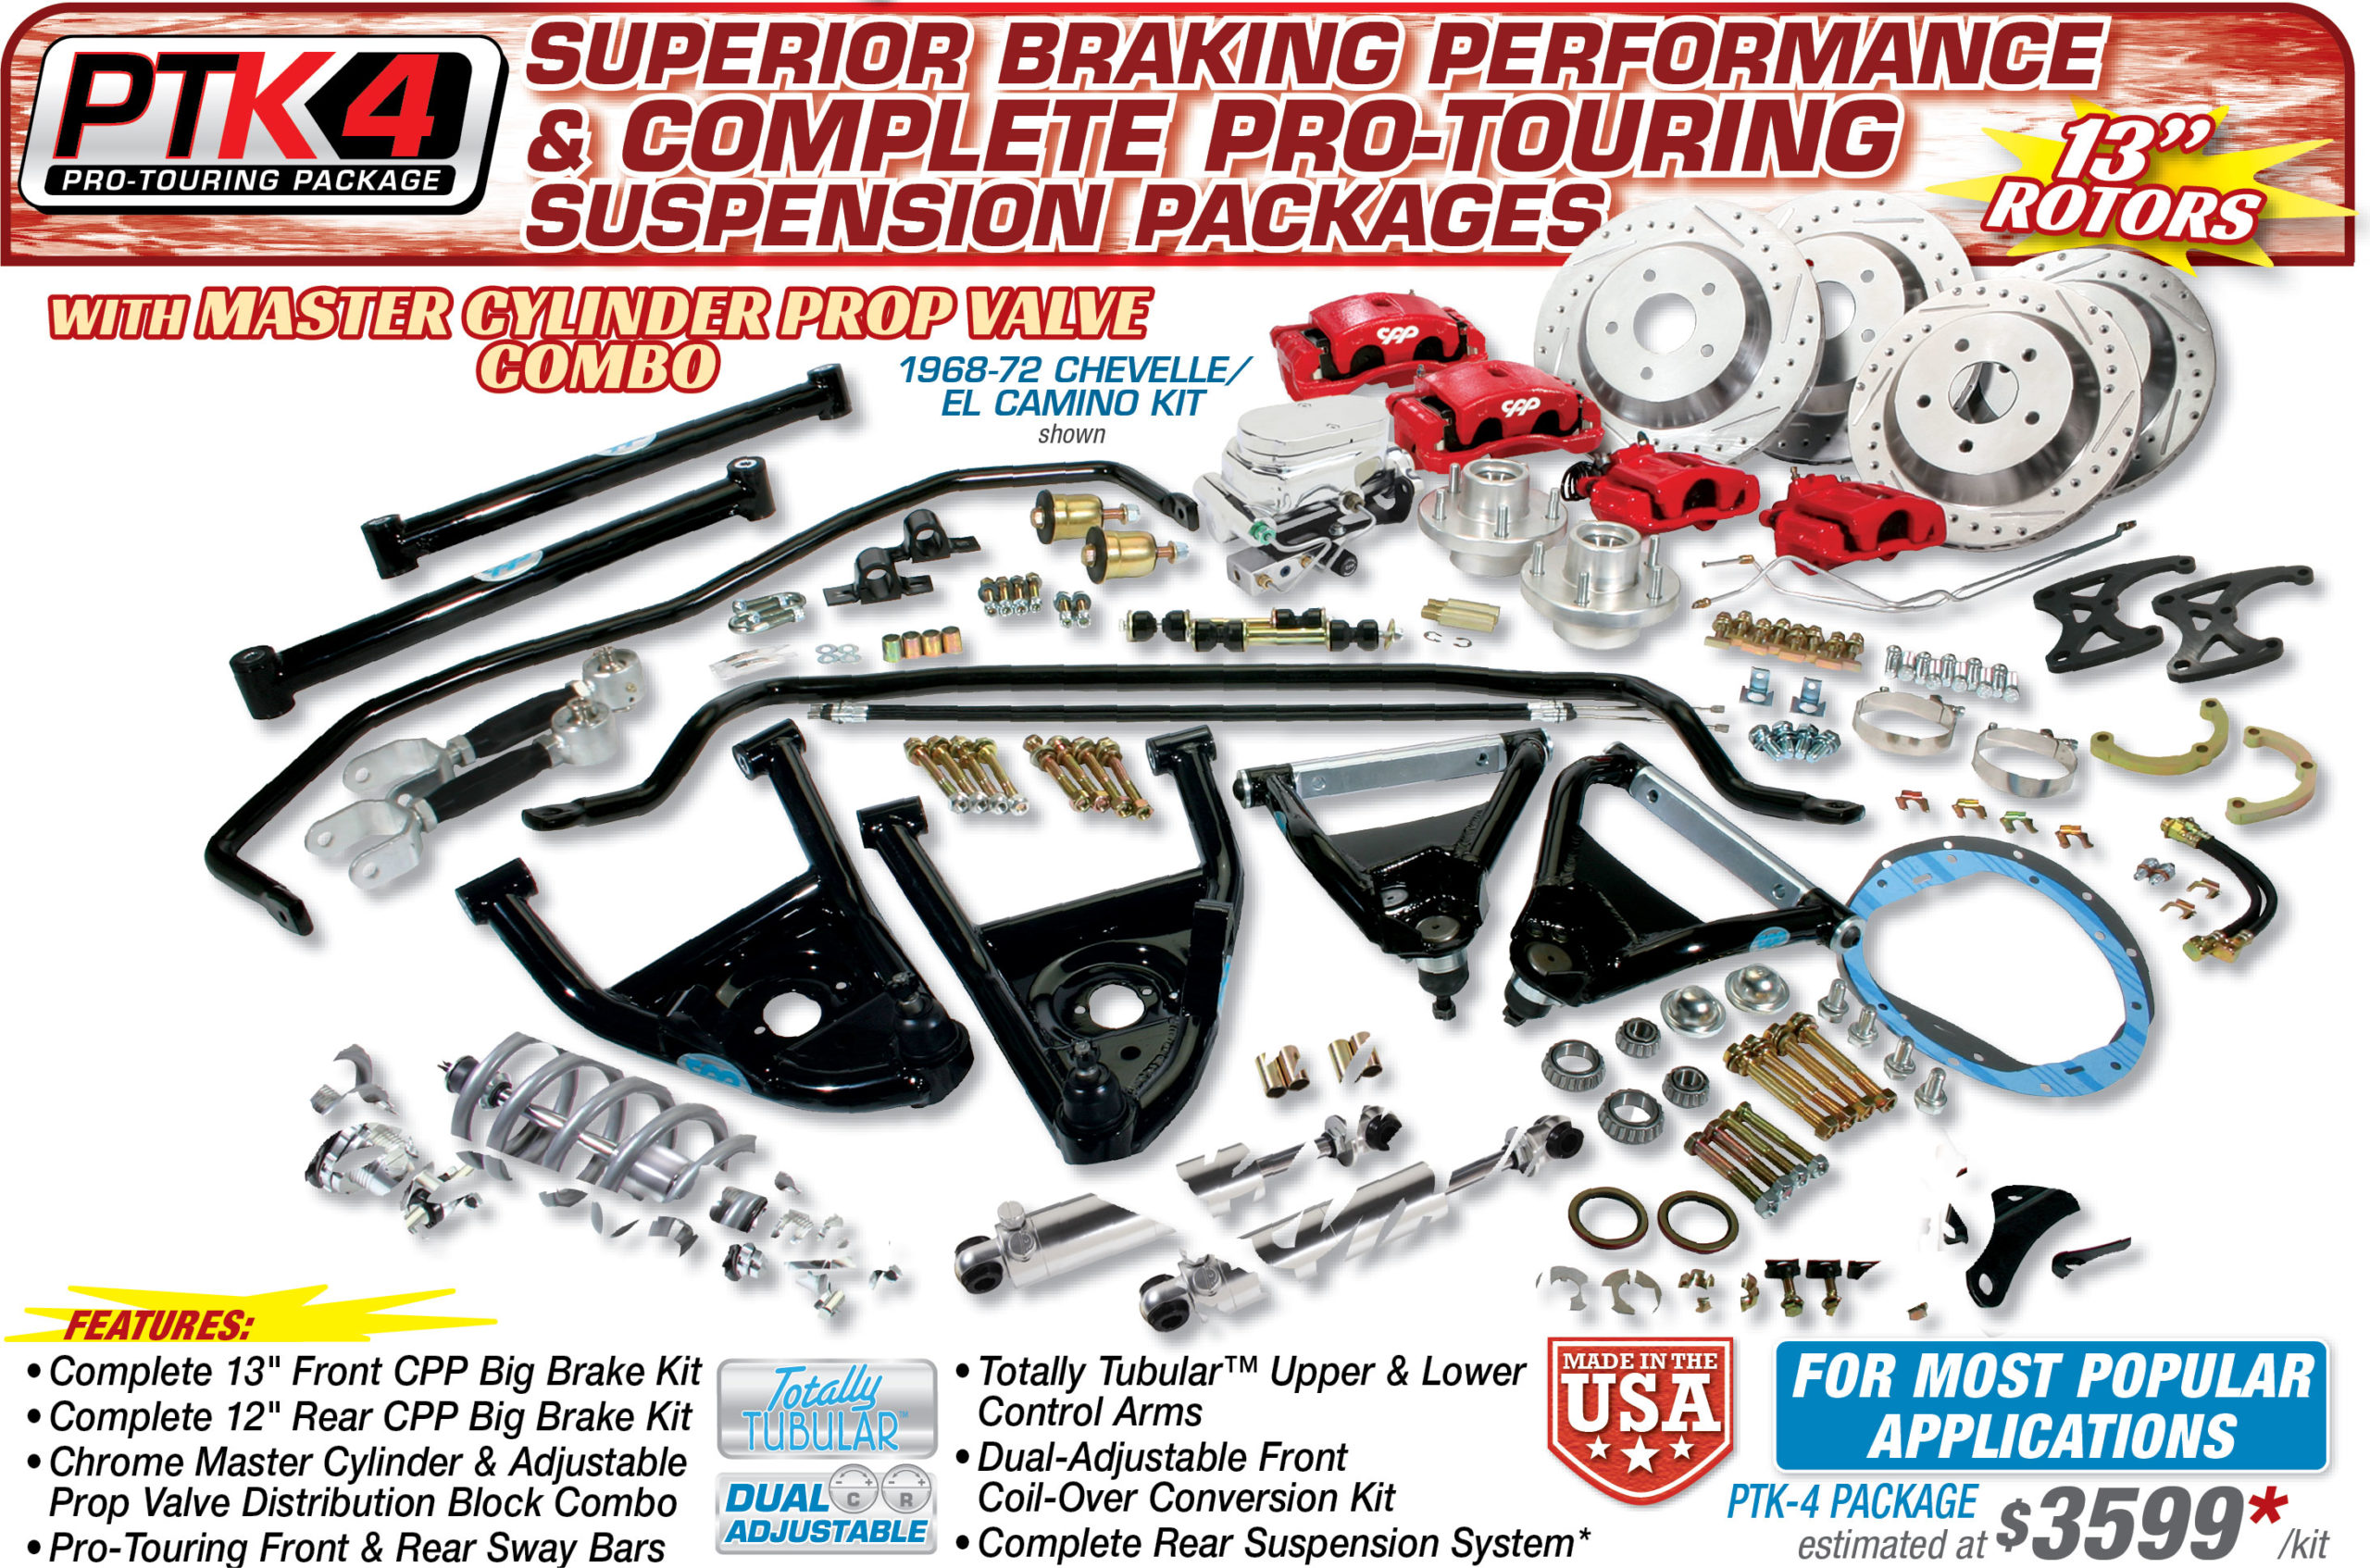 Superior braking performance and complete pro-touring suspension packages